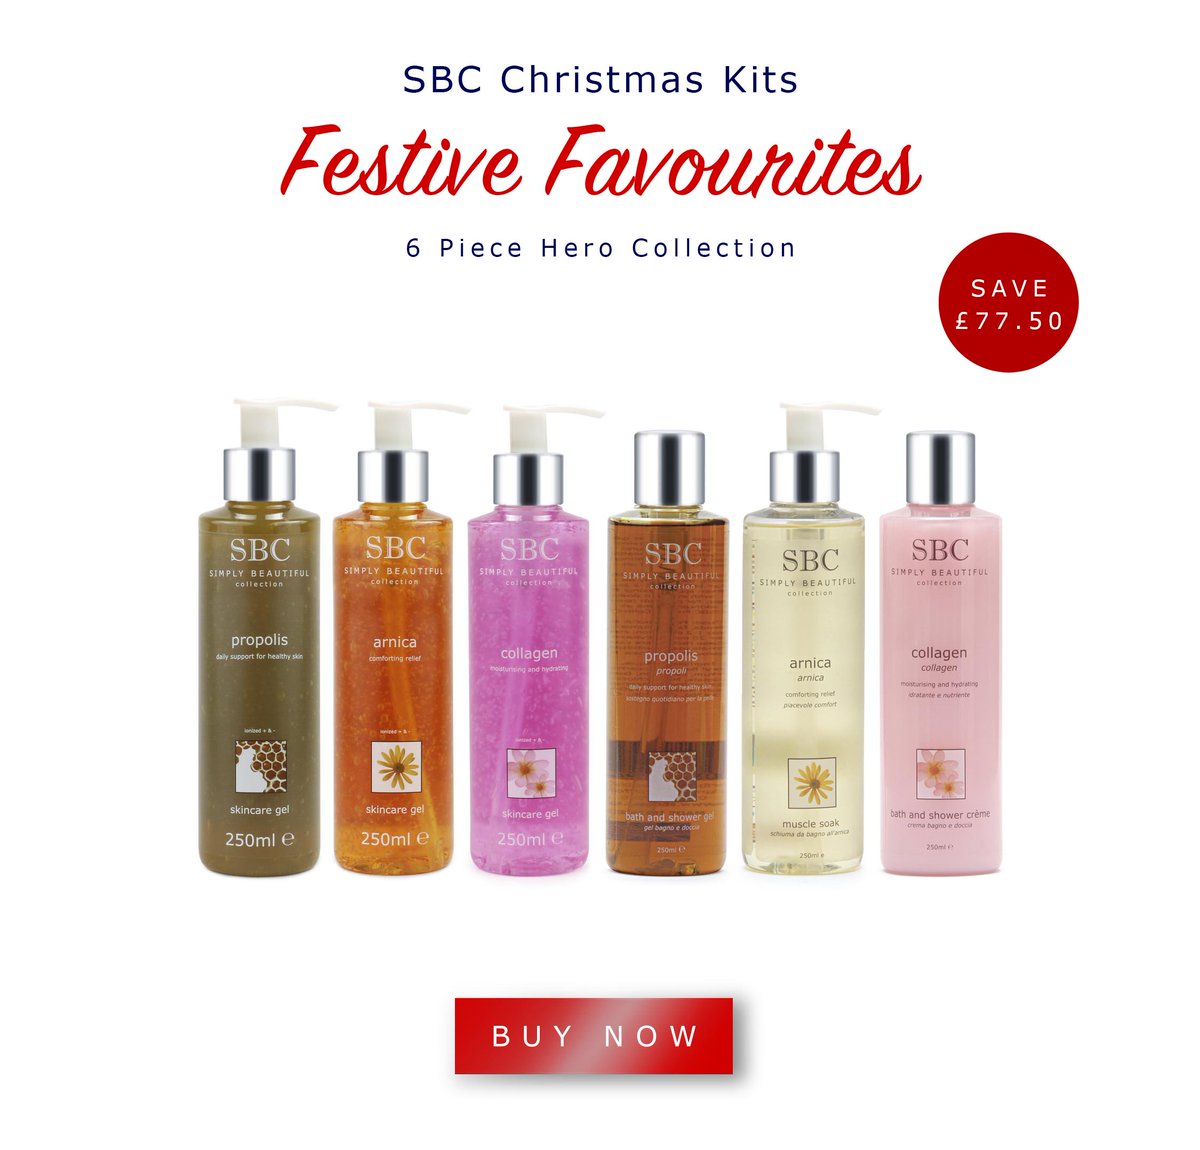 🎅For your chance to #win our Festive Favourites Christmas Kit, just Like & Retweet this post 🎅 Closes 14.12.17 #MerryChristmas #Competition #FestiveFavourites #ChristmasCountdown #SBCGels #Skincare #Beauty